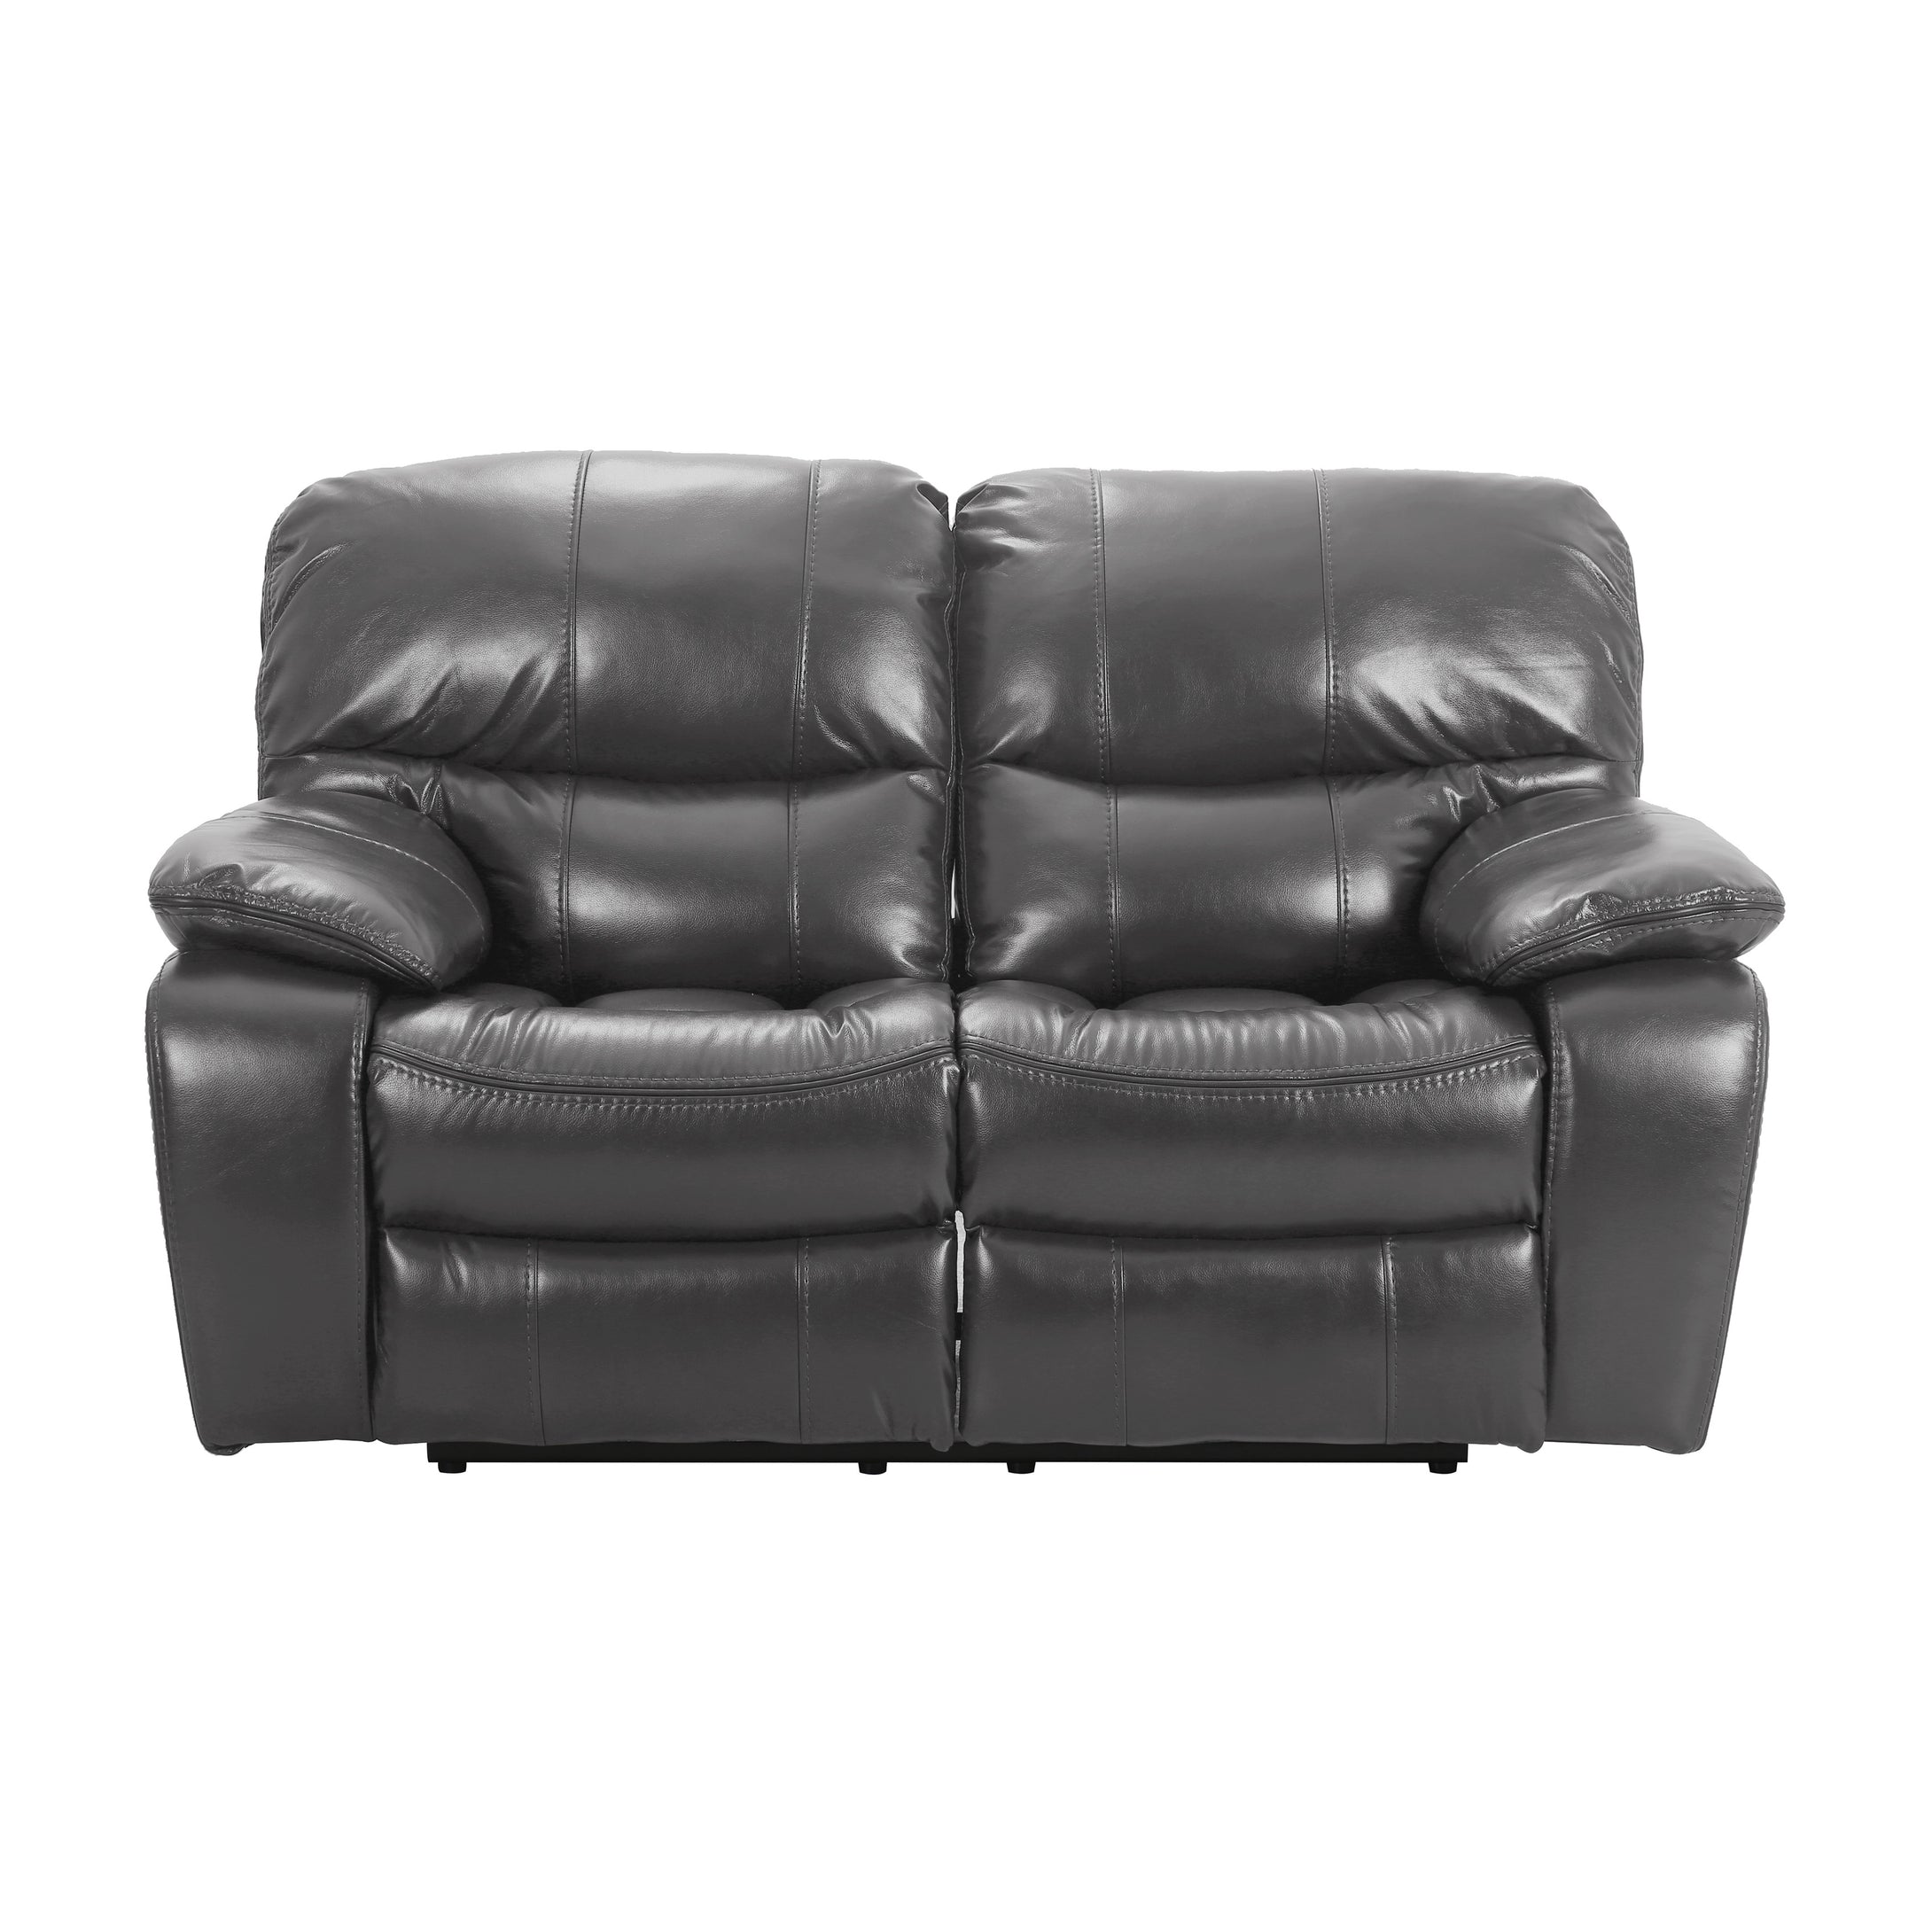 8480GRY-2 Double Reclining Love Seat